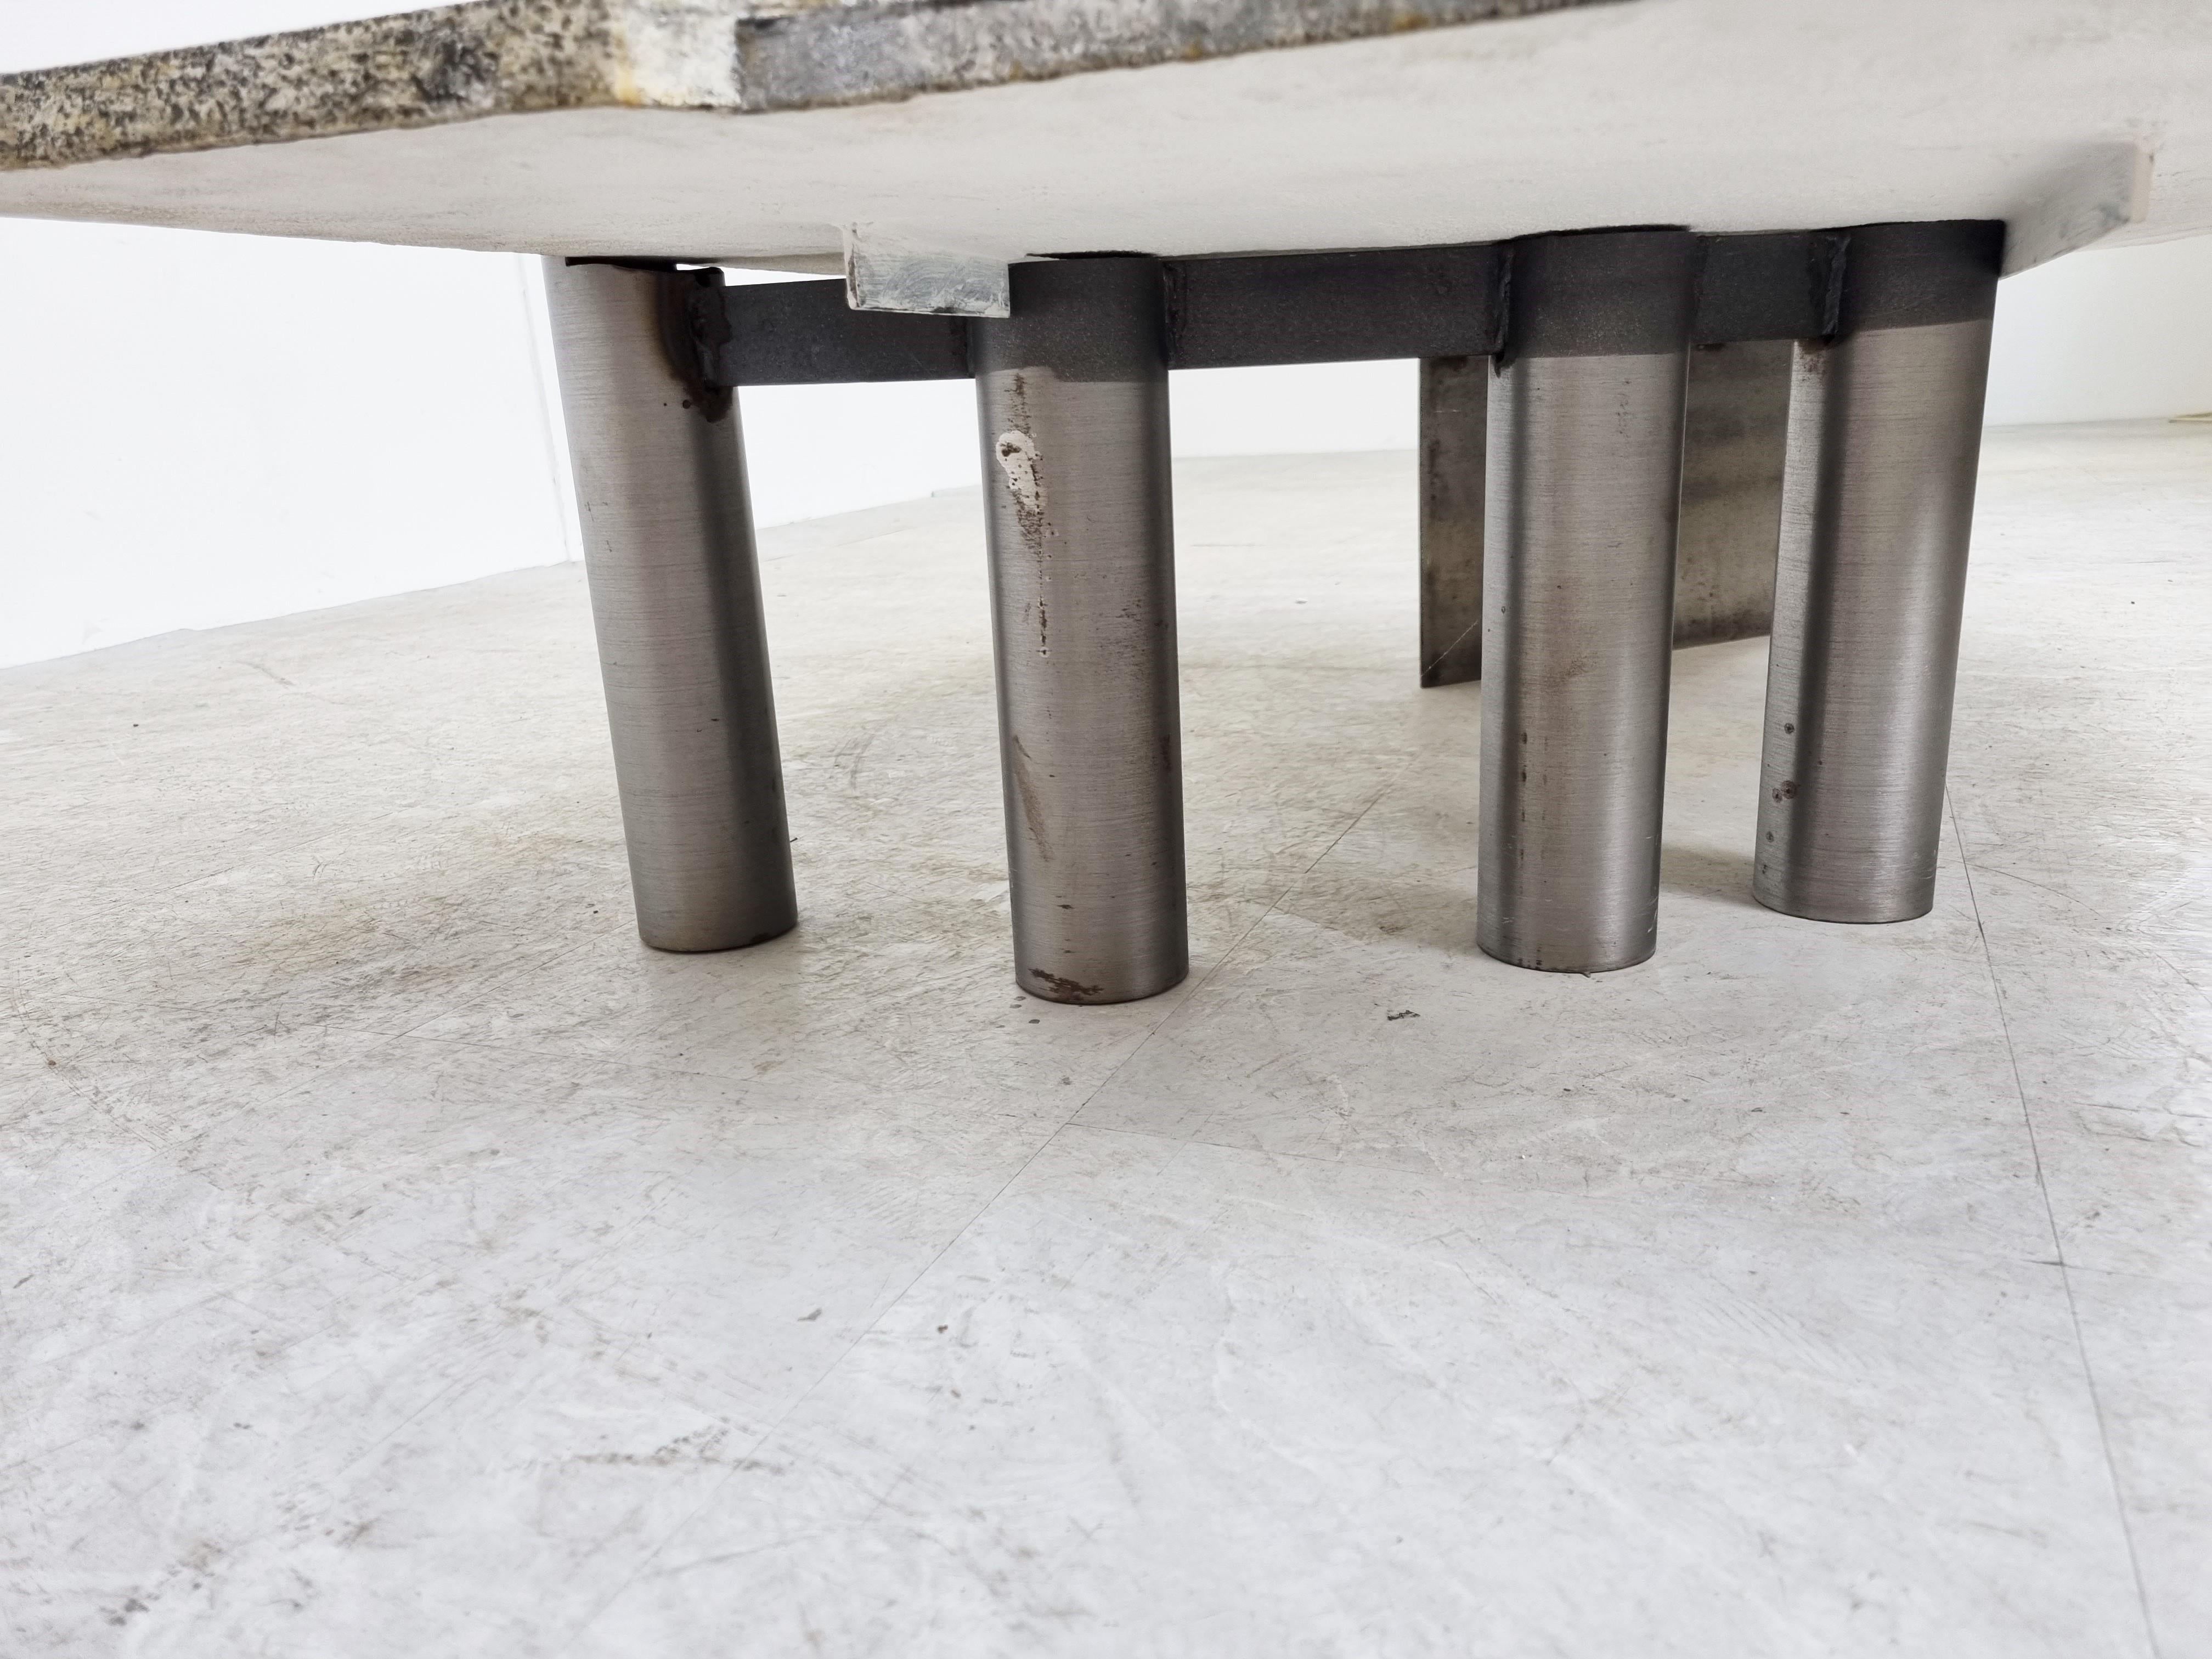 Brutalist coffee table manfuactured by Pia Manu.

The table consists of a mixed ceramic and aluminum top with a steel and aluminum base.

Beautiful unique coffee table with a striking design.

Custom made for a customer in the 1970s 

1970s